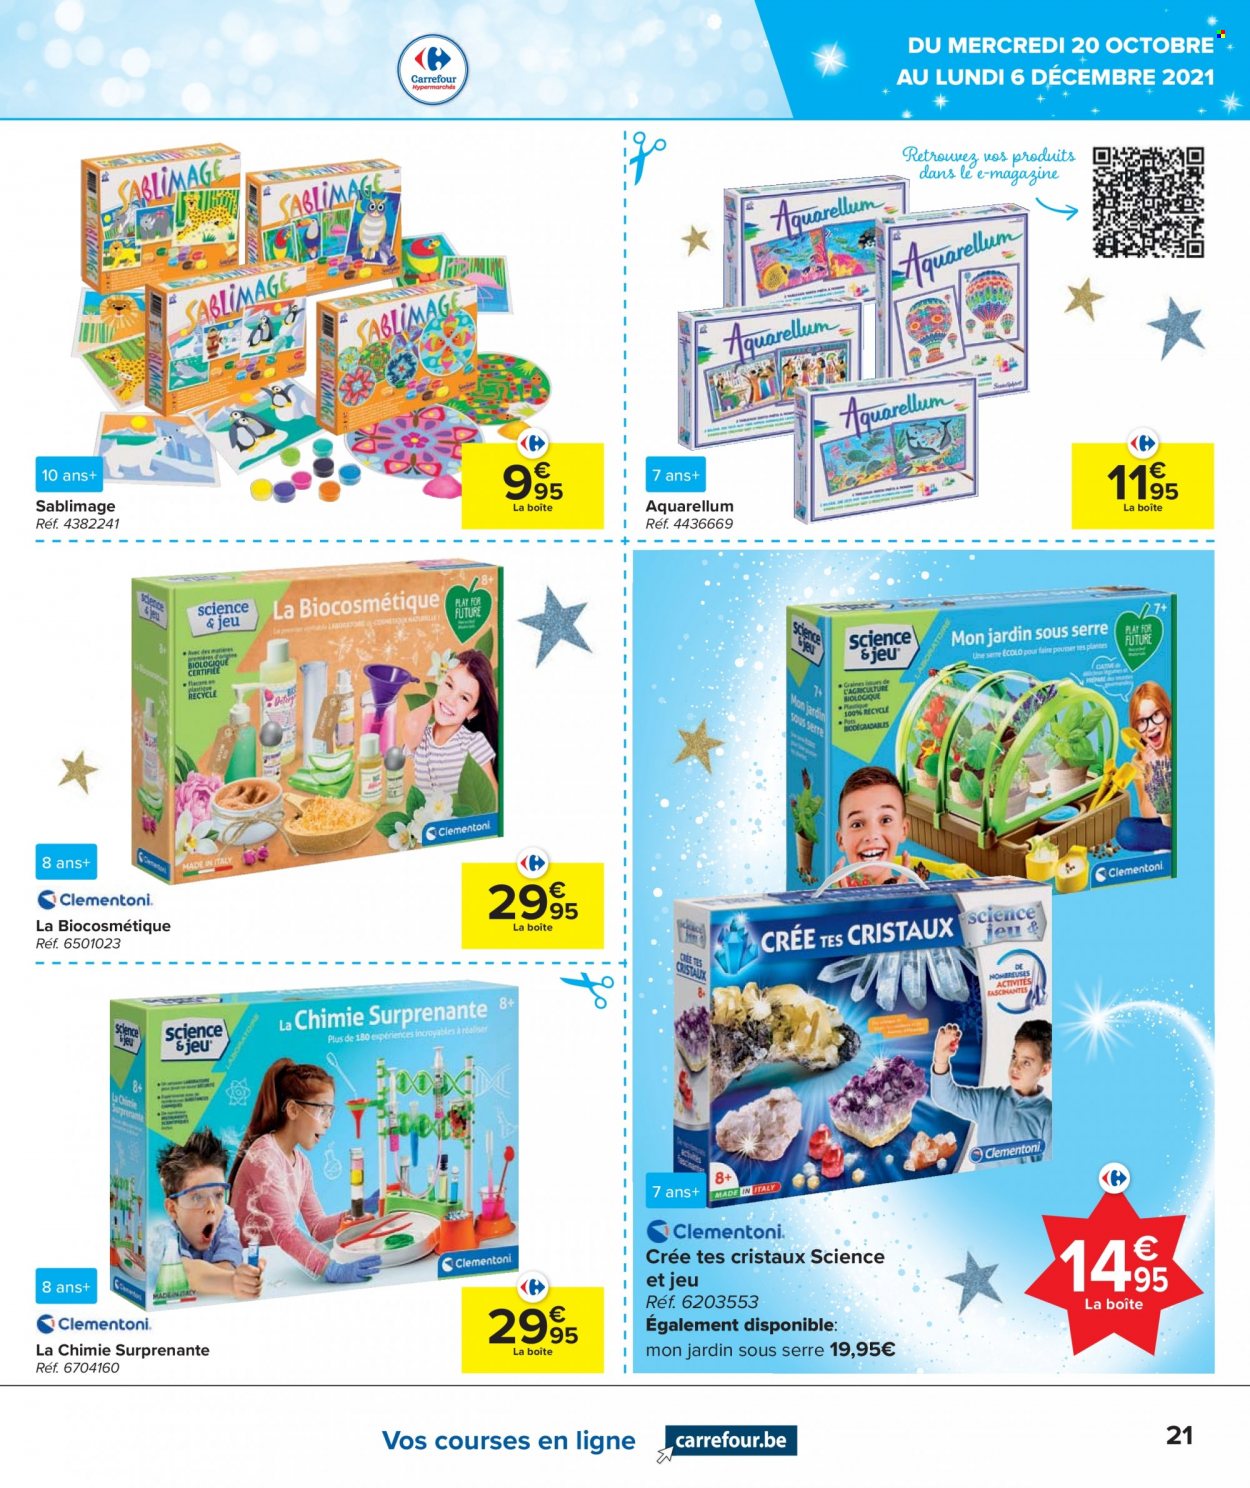 Catalogue Carrefour hypermarkt - 20.10.2021 - 6.12.2021. Page 21.